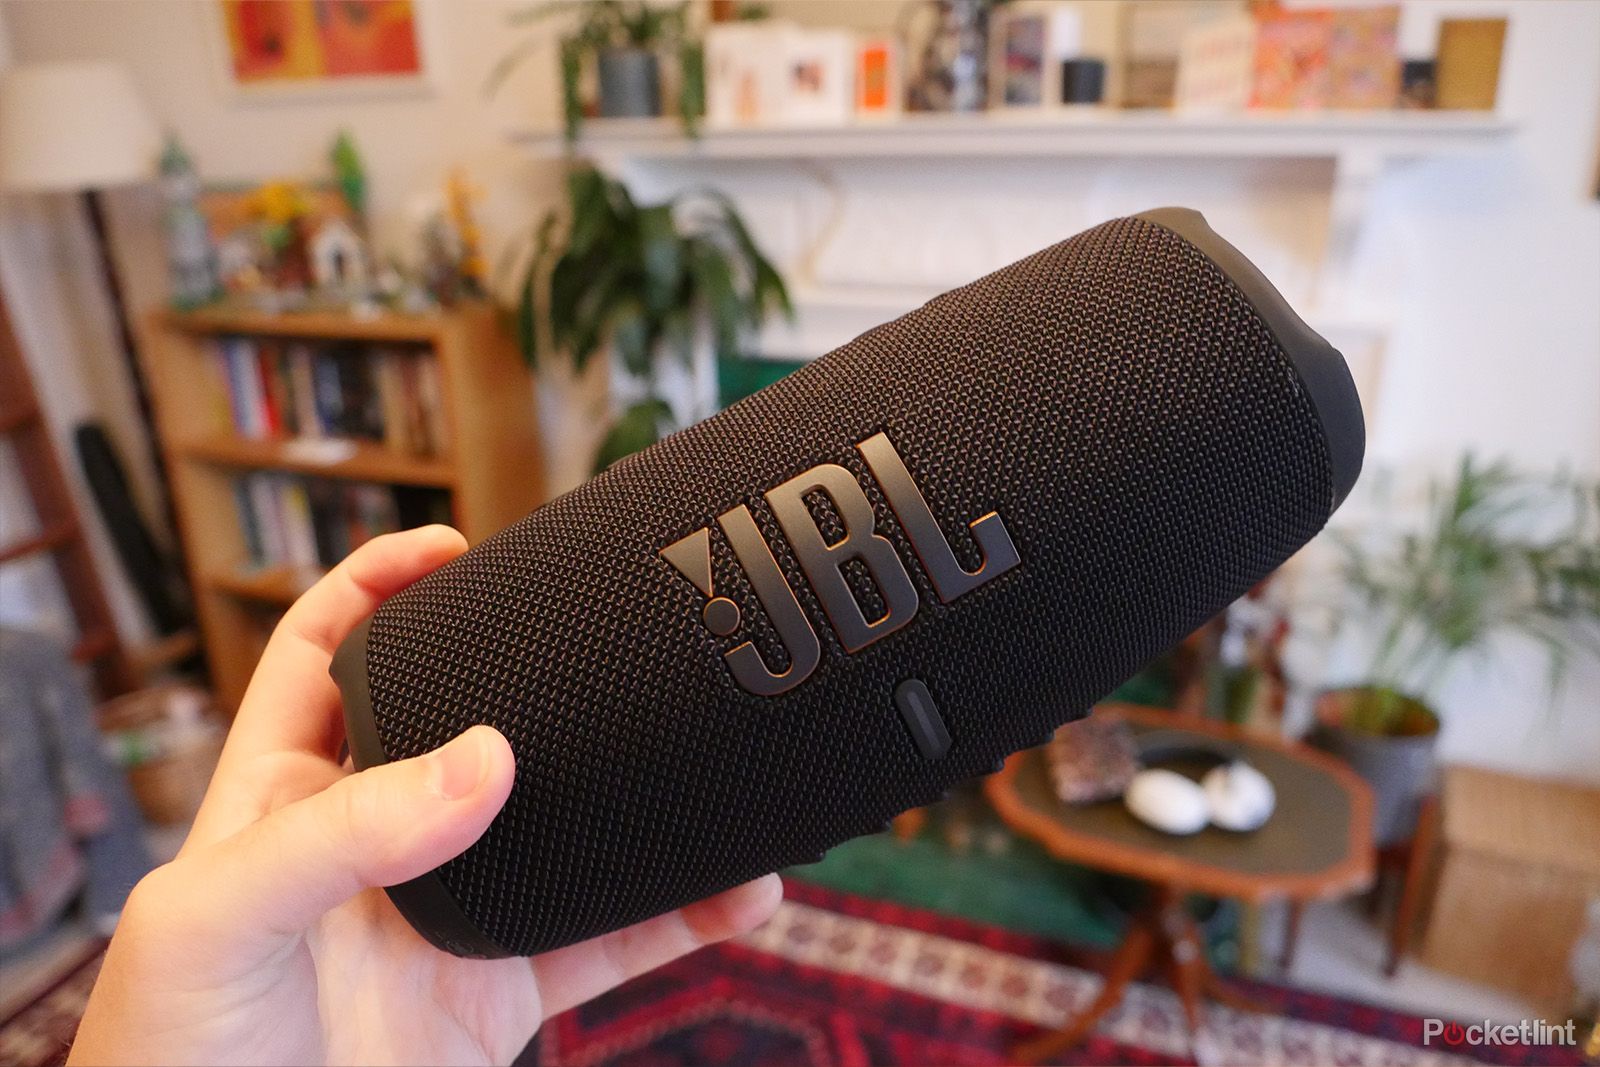 JBL Charge 5 review: a powerful and rugged portable Bluetooth speaker